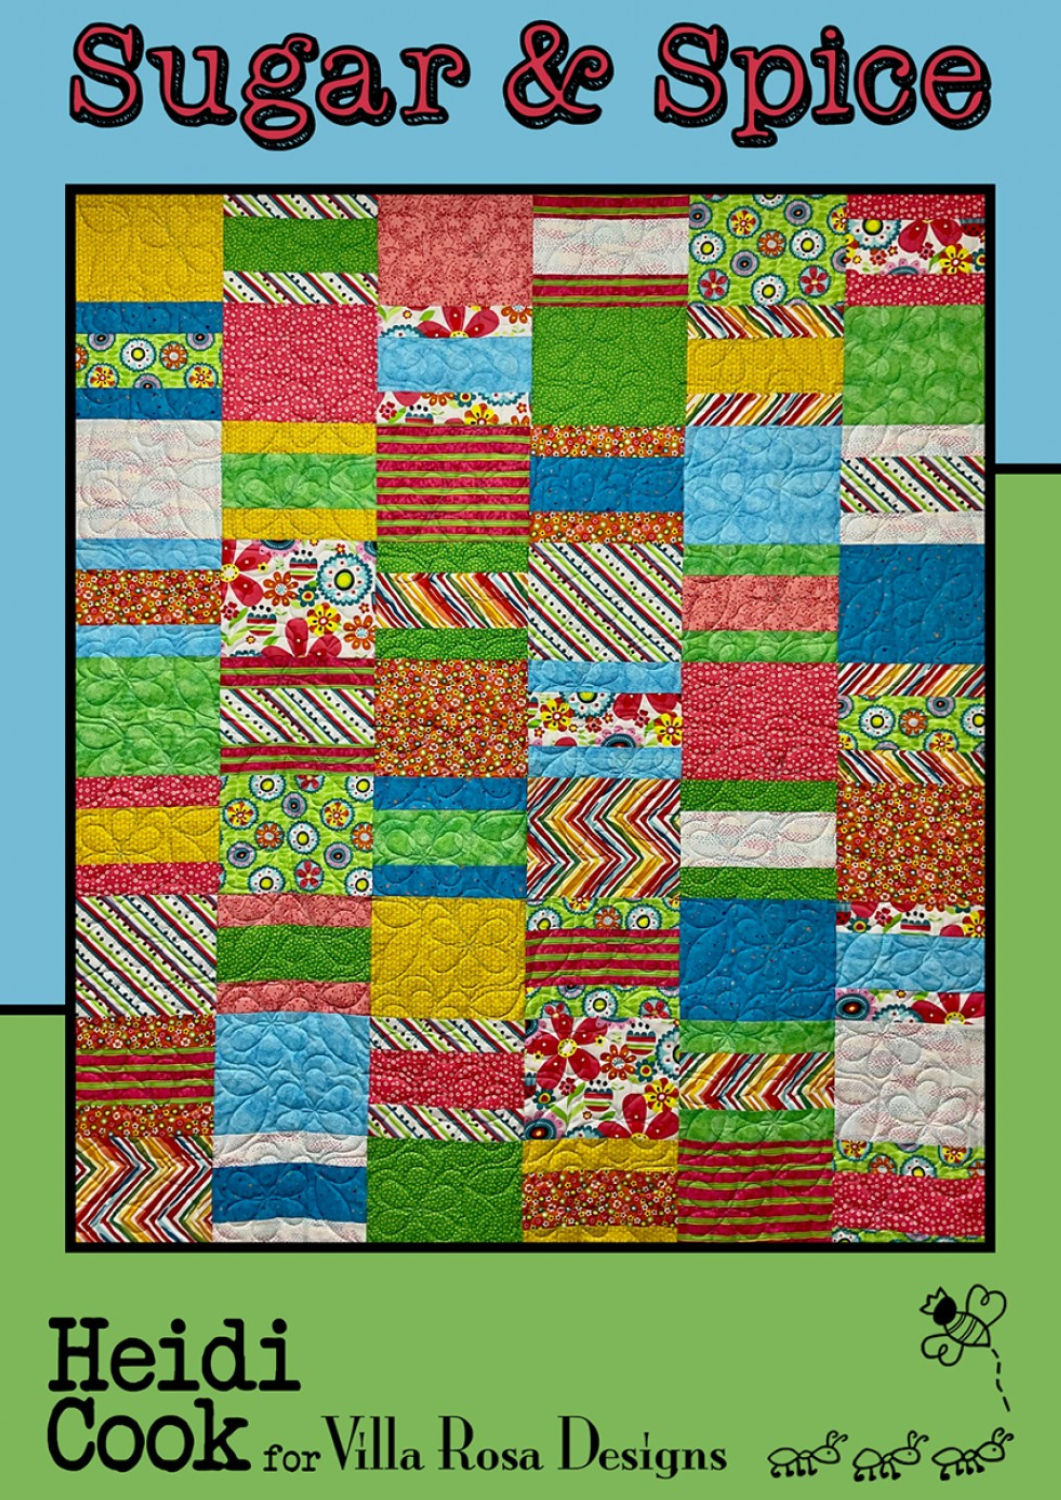 Freckle + Lollie Quilt Kit Zooville Quilt Kit Easy DIY Zoo Animal Quilt Kit with Cotton Fabric from Freckle + Lollie, Zooville Collection